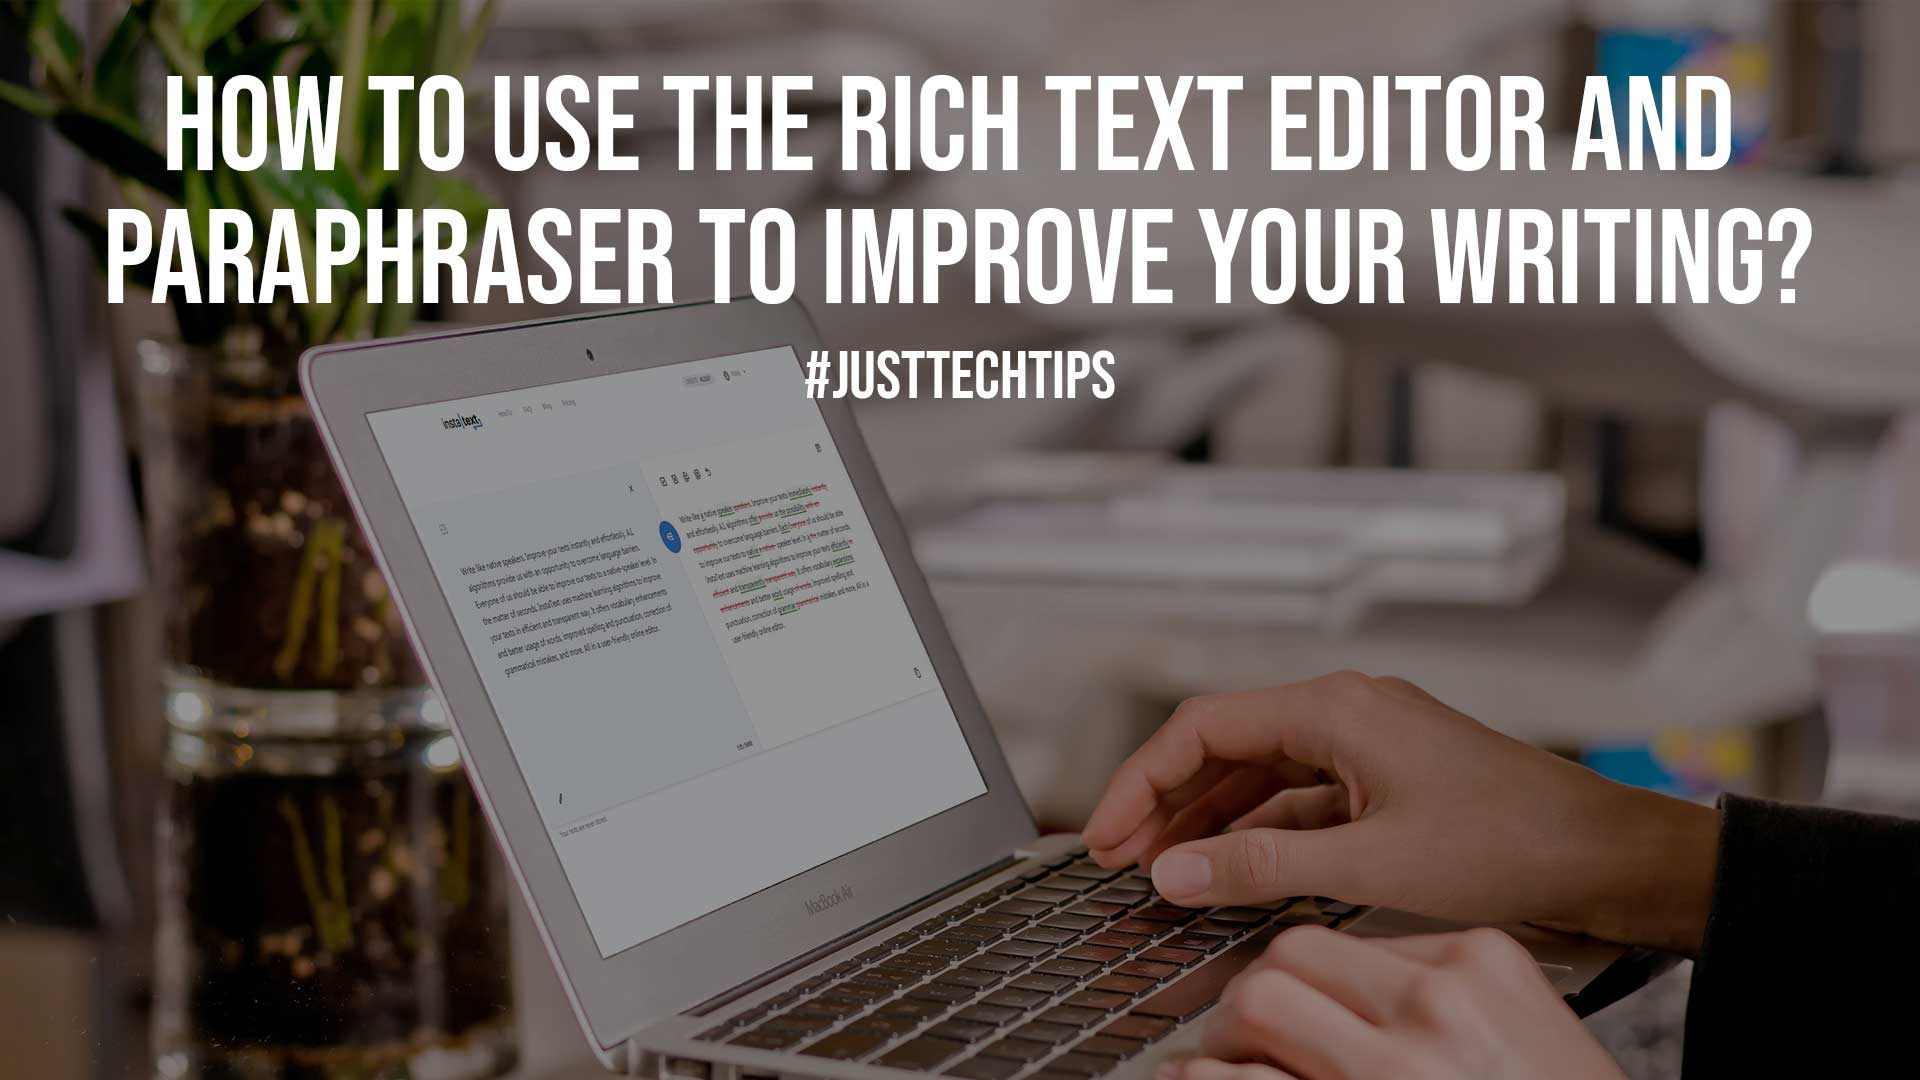 How To Use The Rich Text Editor And Paraphraser To Improve Your Writing